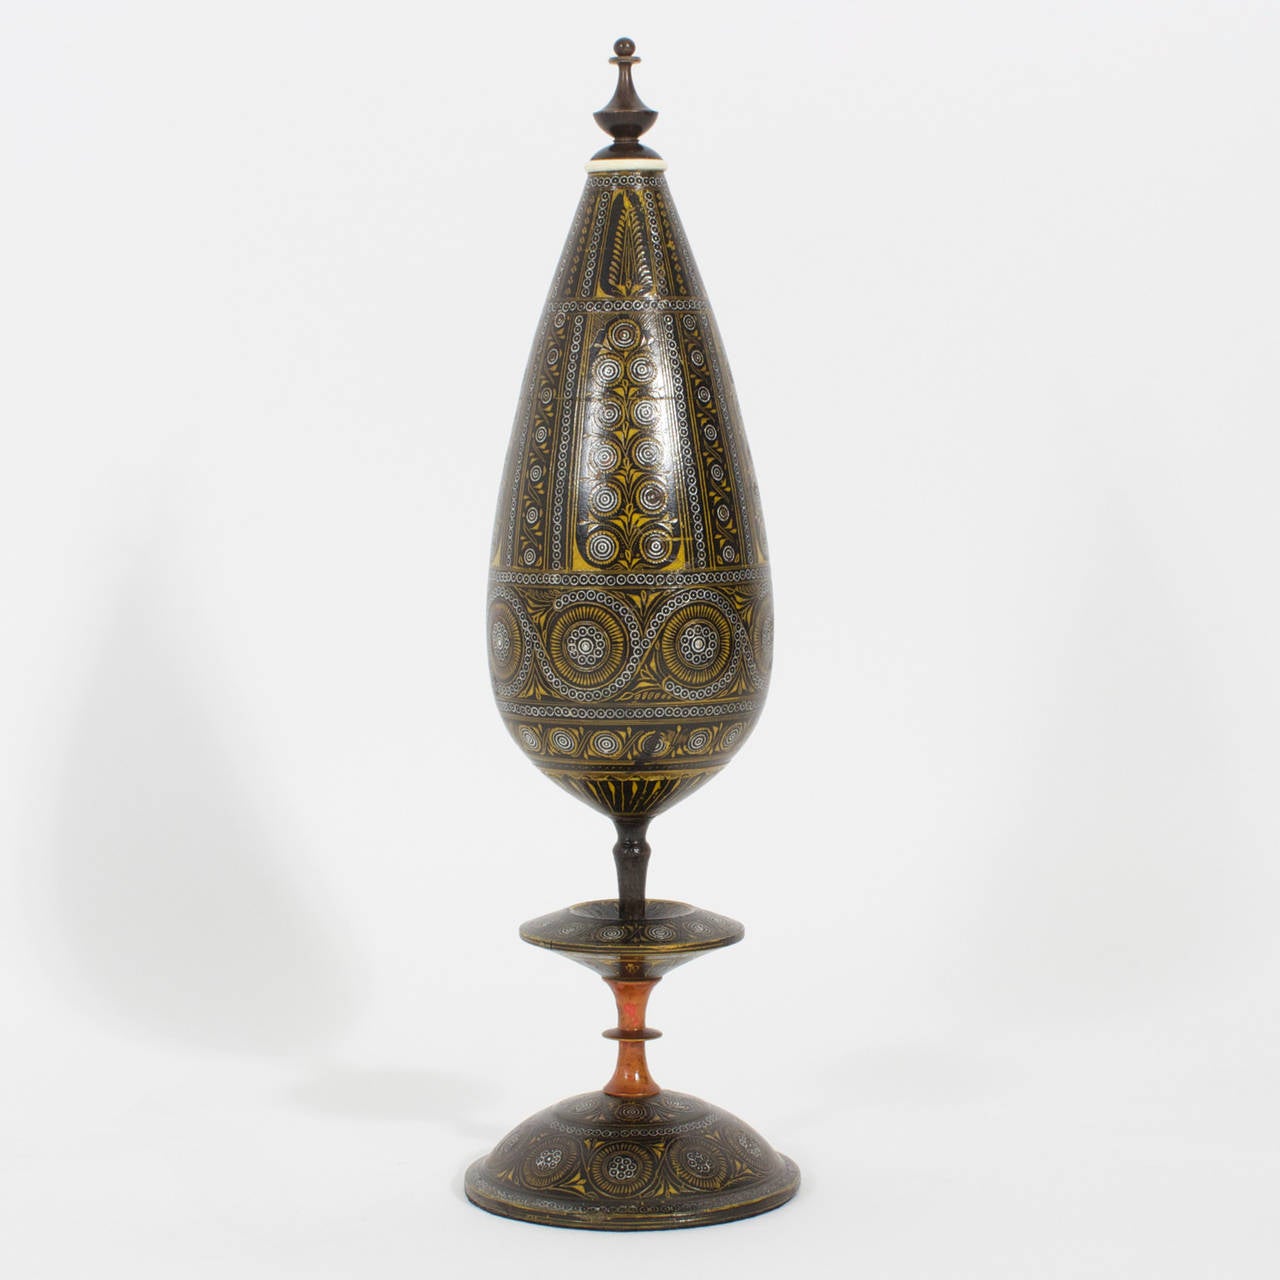 A fine and fascinating pair of carved wood and lacquered garnitures,  decorated in black, gold and ocher in a repeat floral pattern, on elegant stemmed bases with just a hint of red, on the exceptional turning, the whole topped with neoclassical